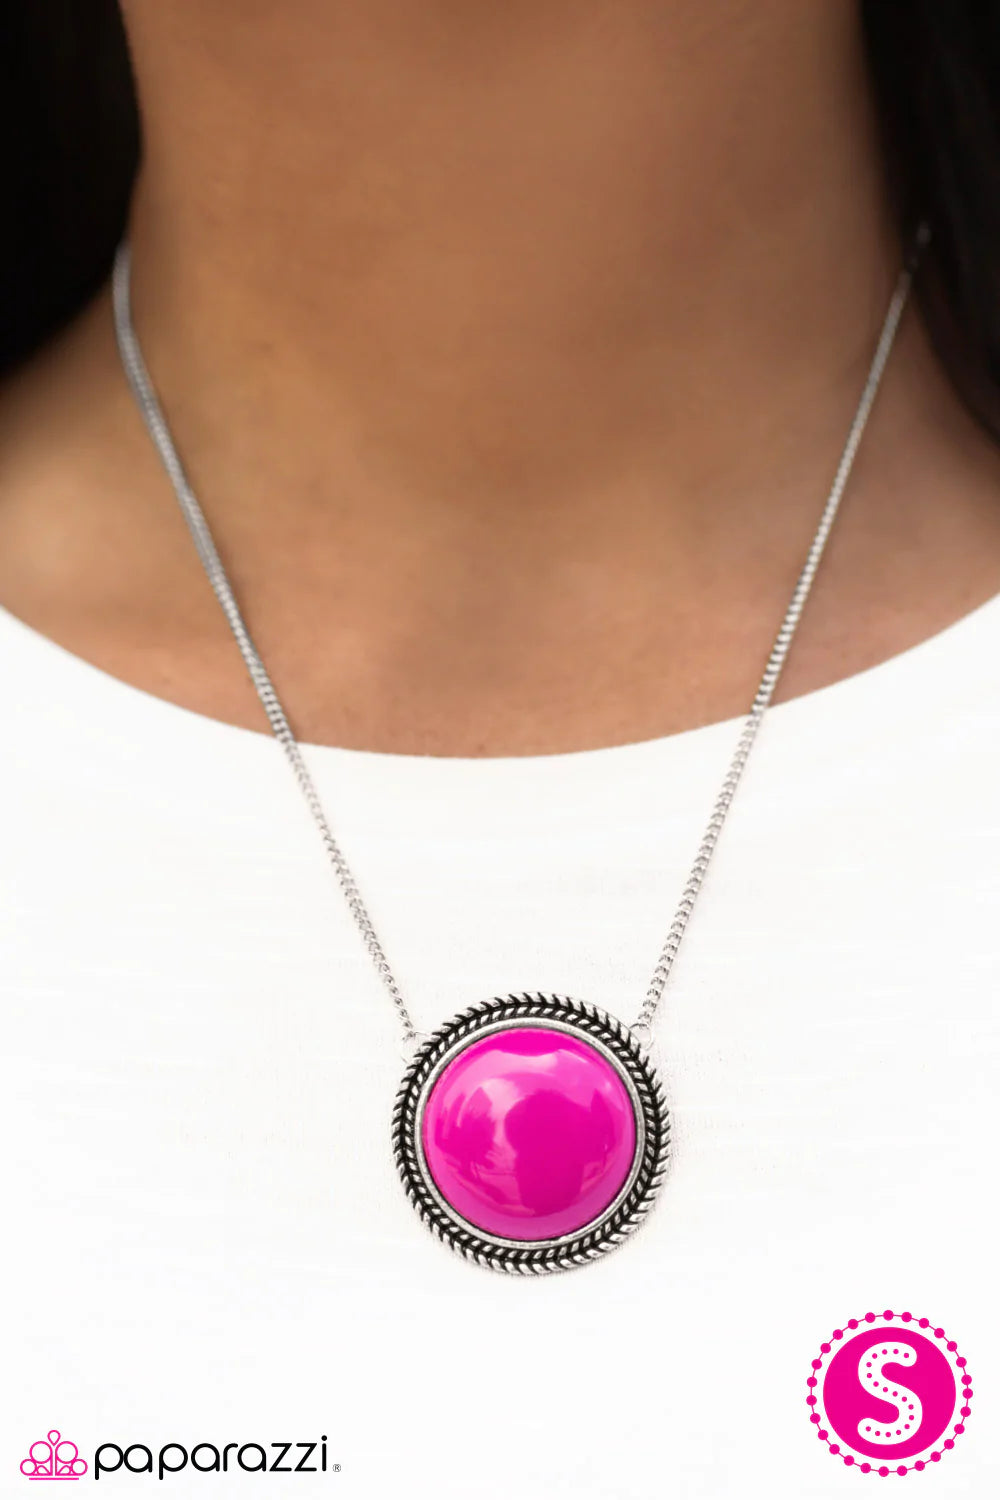 Paparazzi Necklace ~ Whats Poppin? - Pink